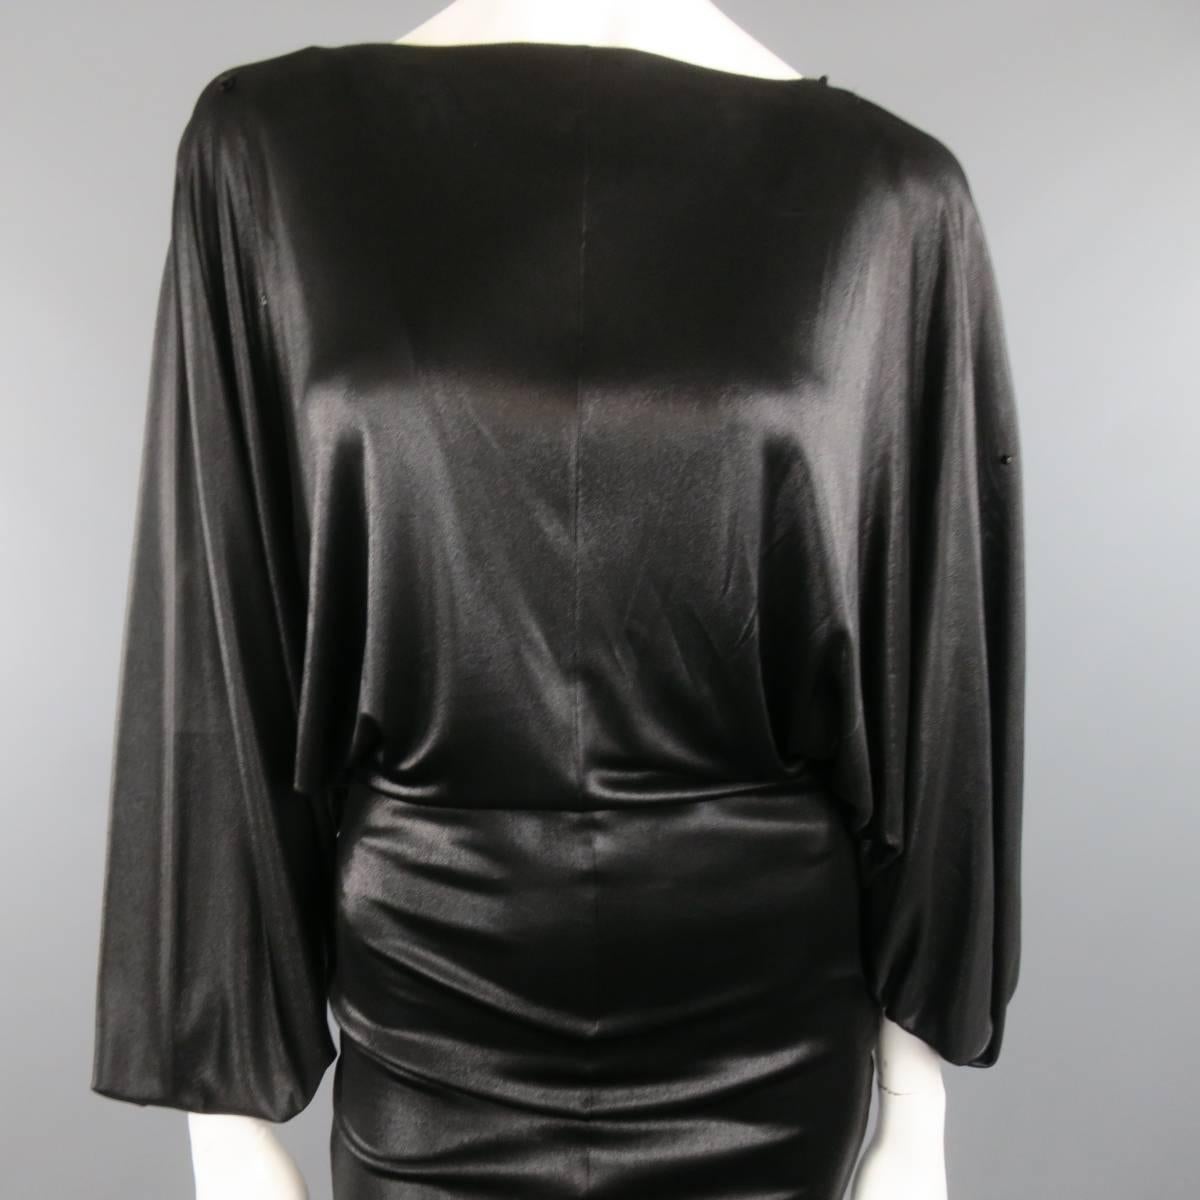 This rare MAISON MARTIN MARGIELA (blank nameless tag) cocktail dress comes in a light weight shiny black stretch lame' and features a high neckline, extra long batwing sleeves, crystal beaded shoulders, and fitted silhouette. Imperfections on beaded